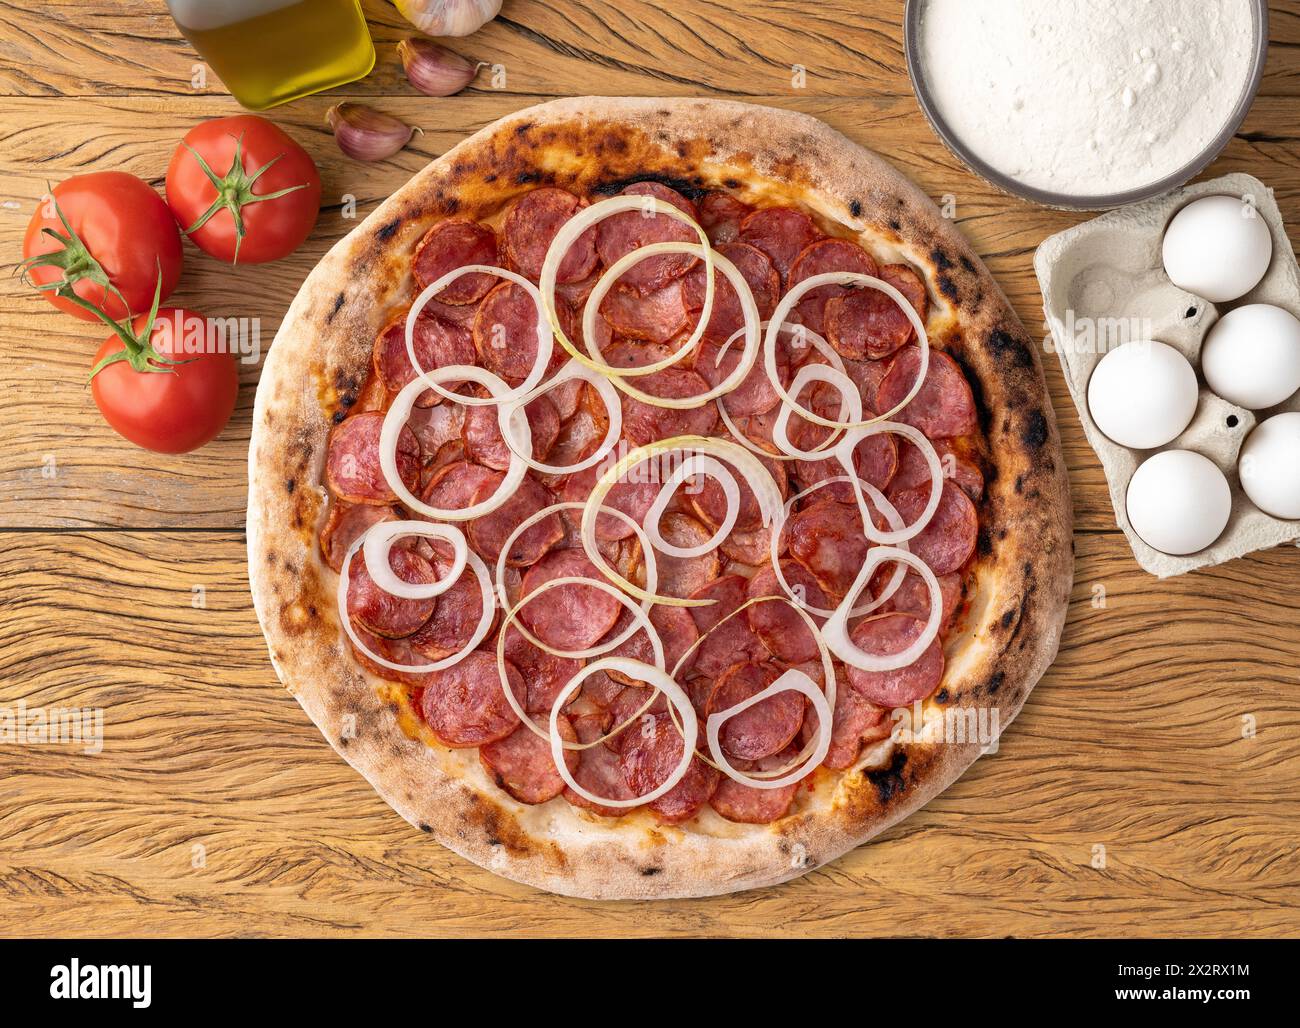 Calabrese sausage pizza with tomatoes, olive oil, eggs and flour over wooden table. Stock Photo